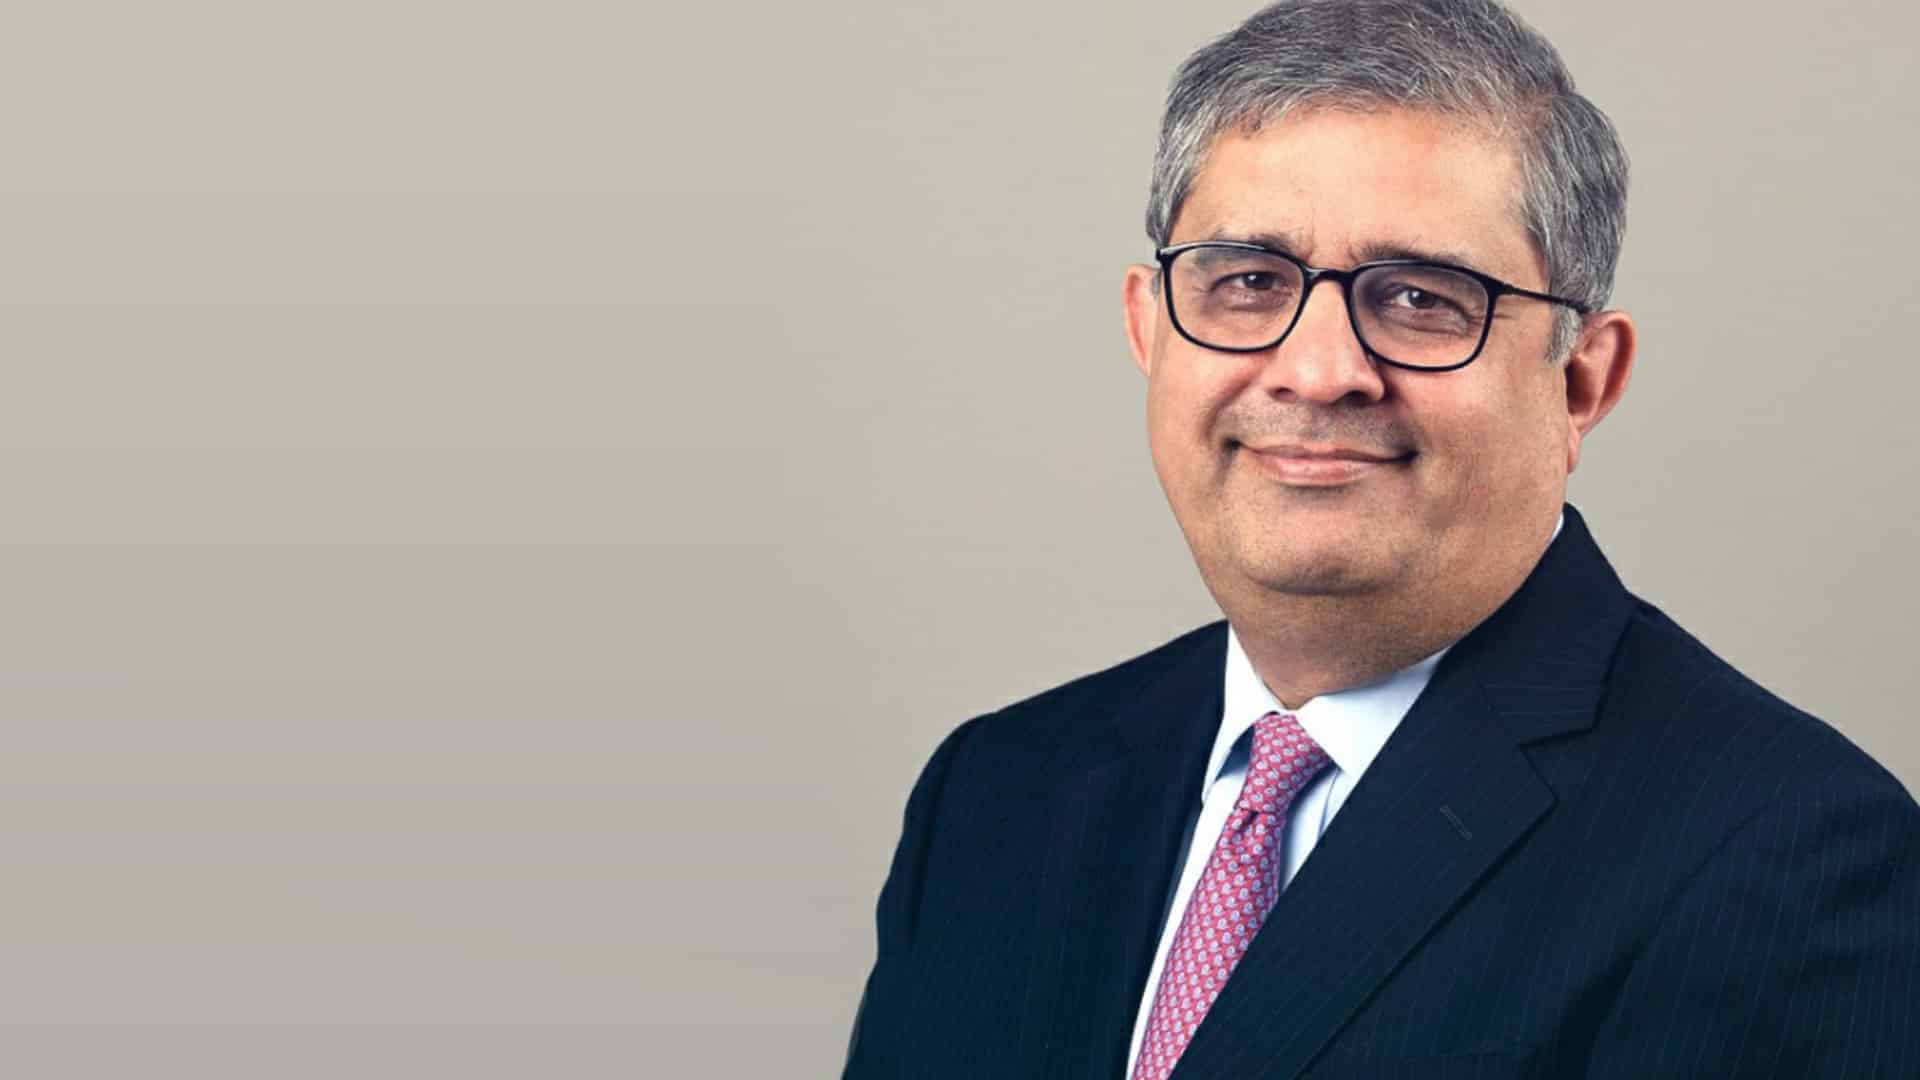 Govt norms ensure no one makes money in payments space, says Axis Bank head Amitabh Chaudhry